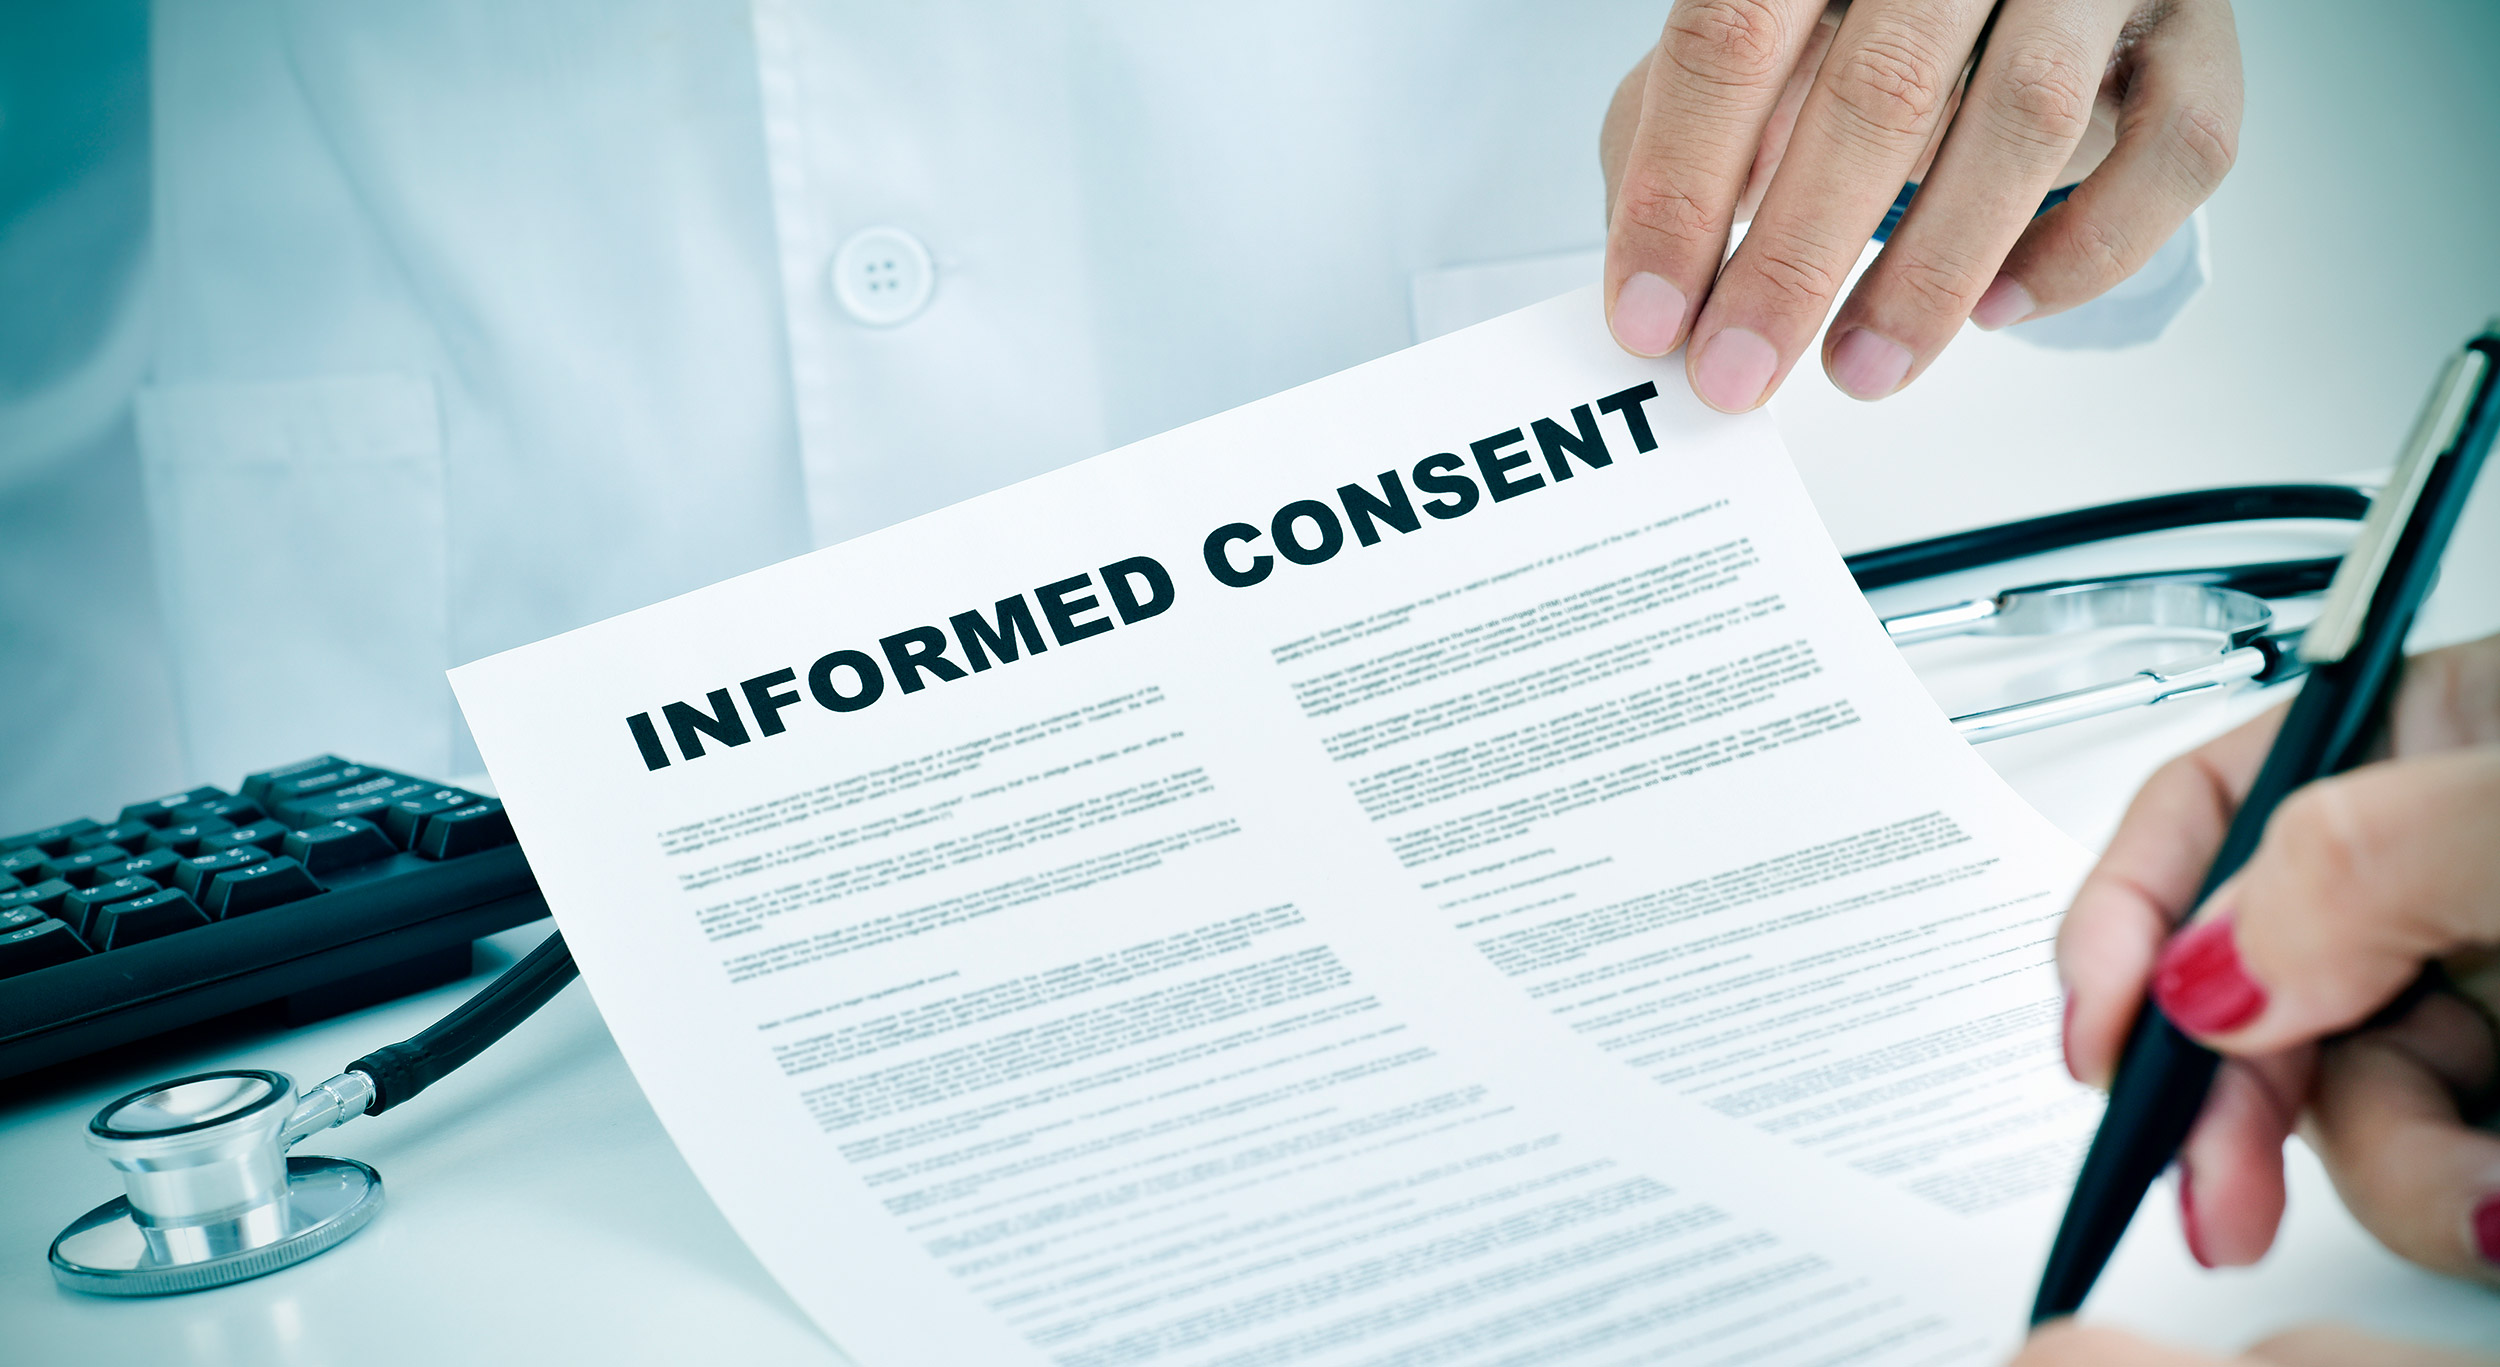 Illustrations may help clarify the consent process better than mere words.